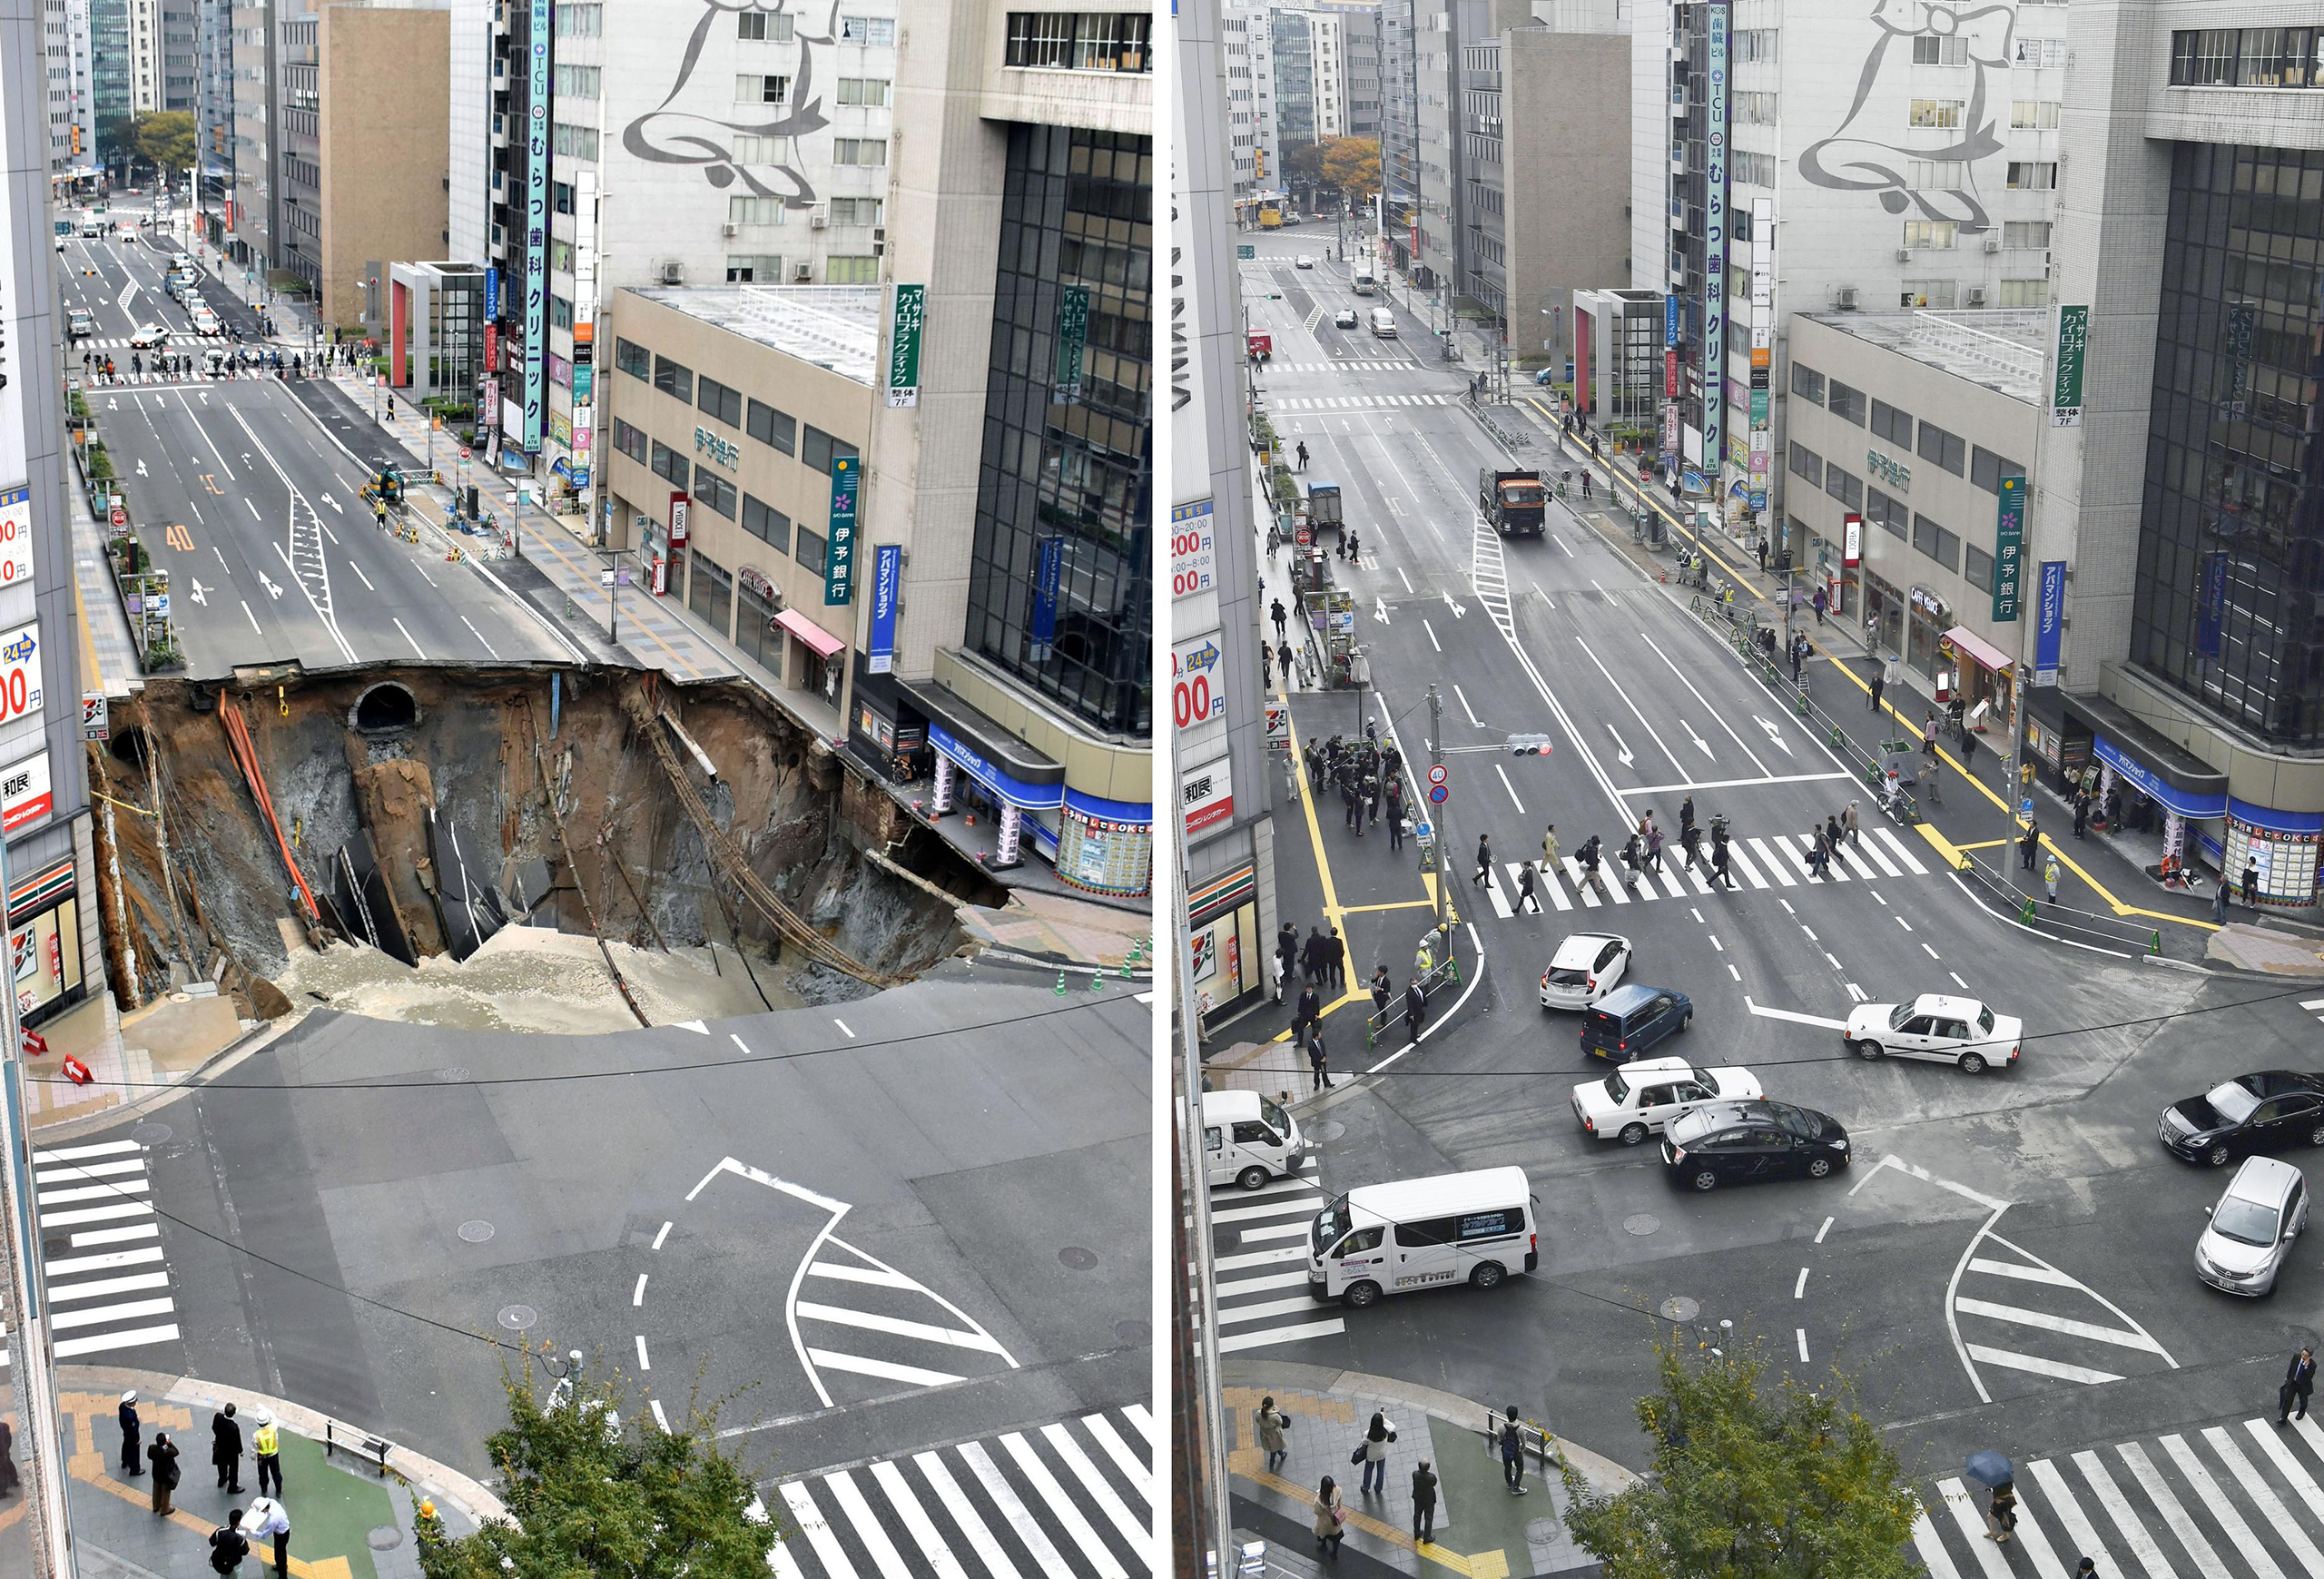 A combination photo shows a sinkhole in Fukuoka, Japan, on Nov. 8, 2016, left, and fixed a week later on Nov. 15, 2016. (Kyodo News/AP)